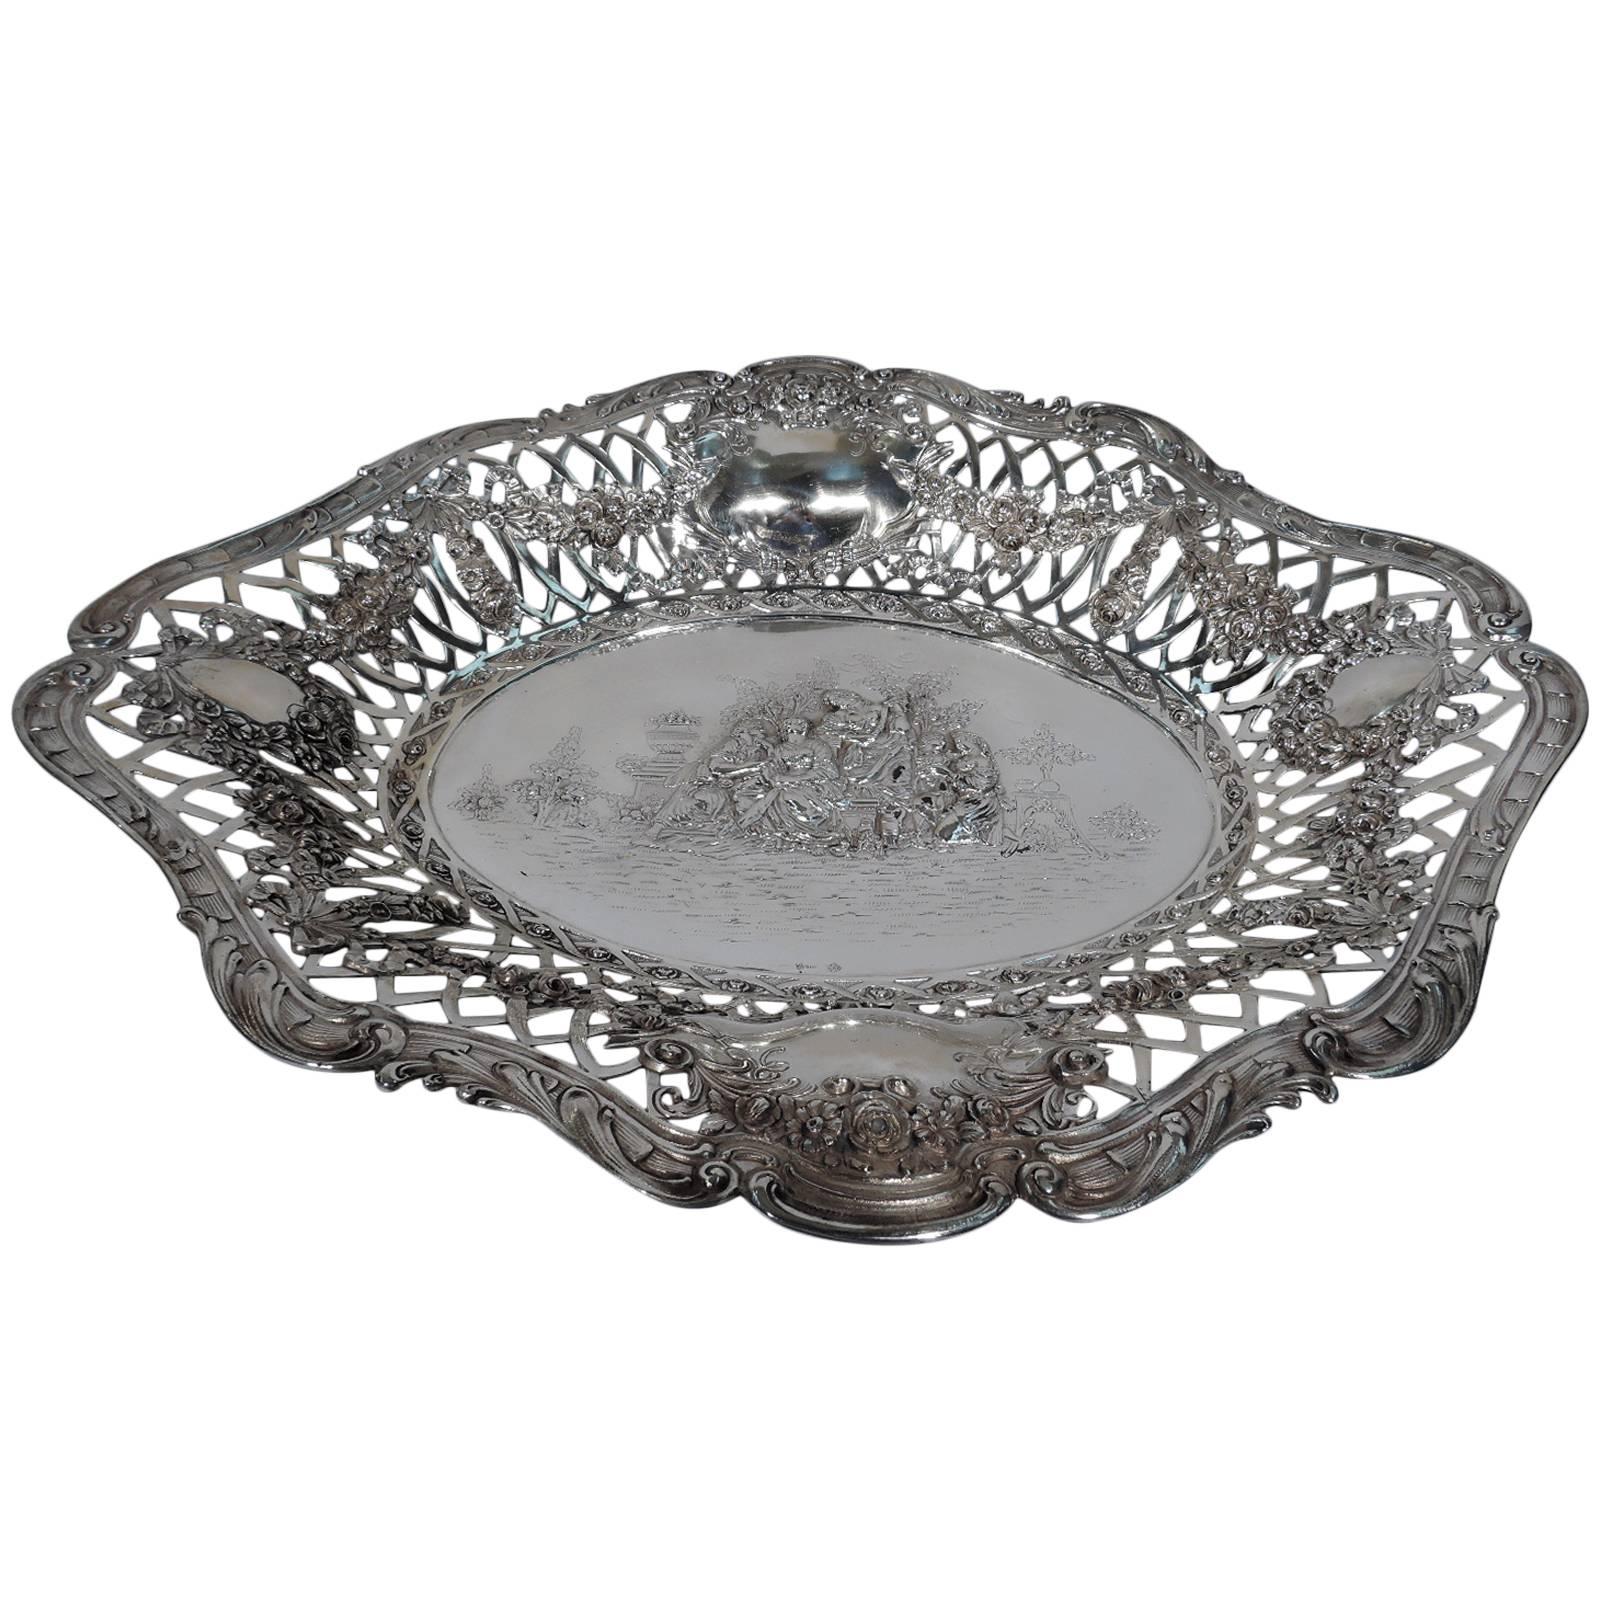 Large Antique German Neoclassical Silver Bowl